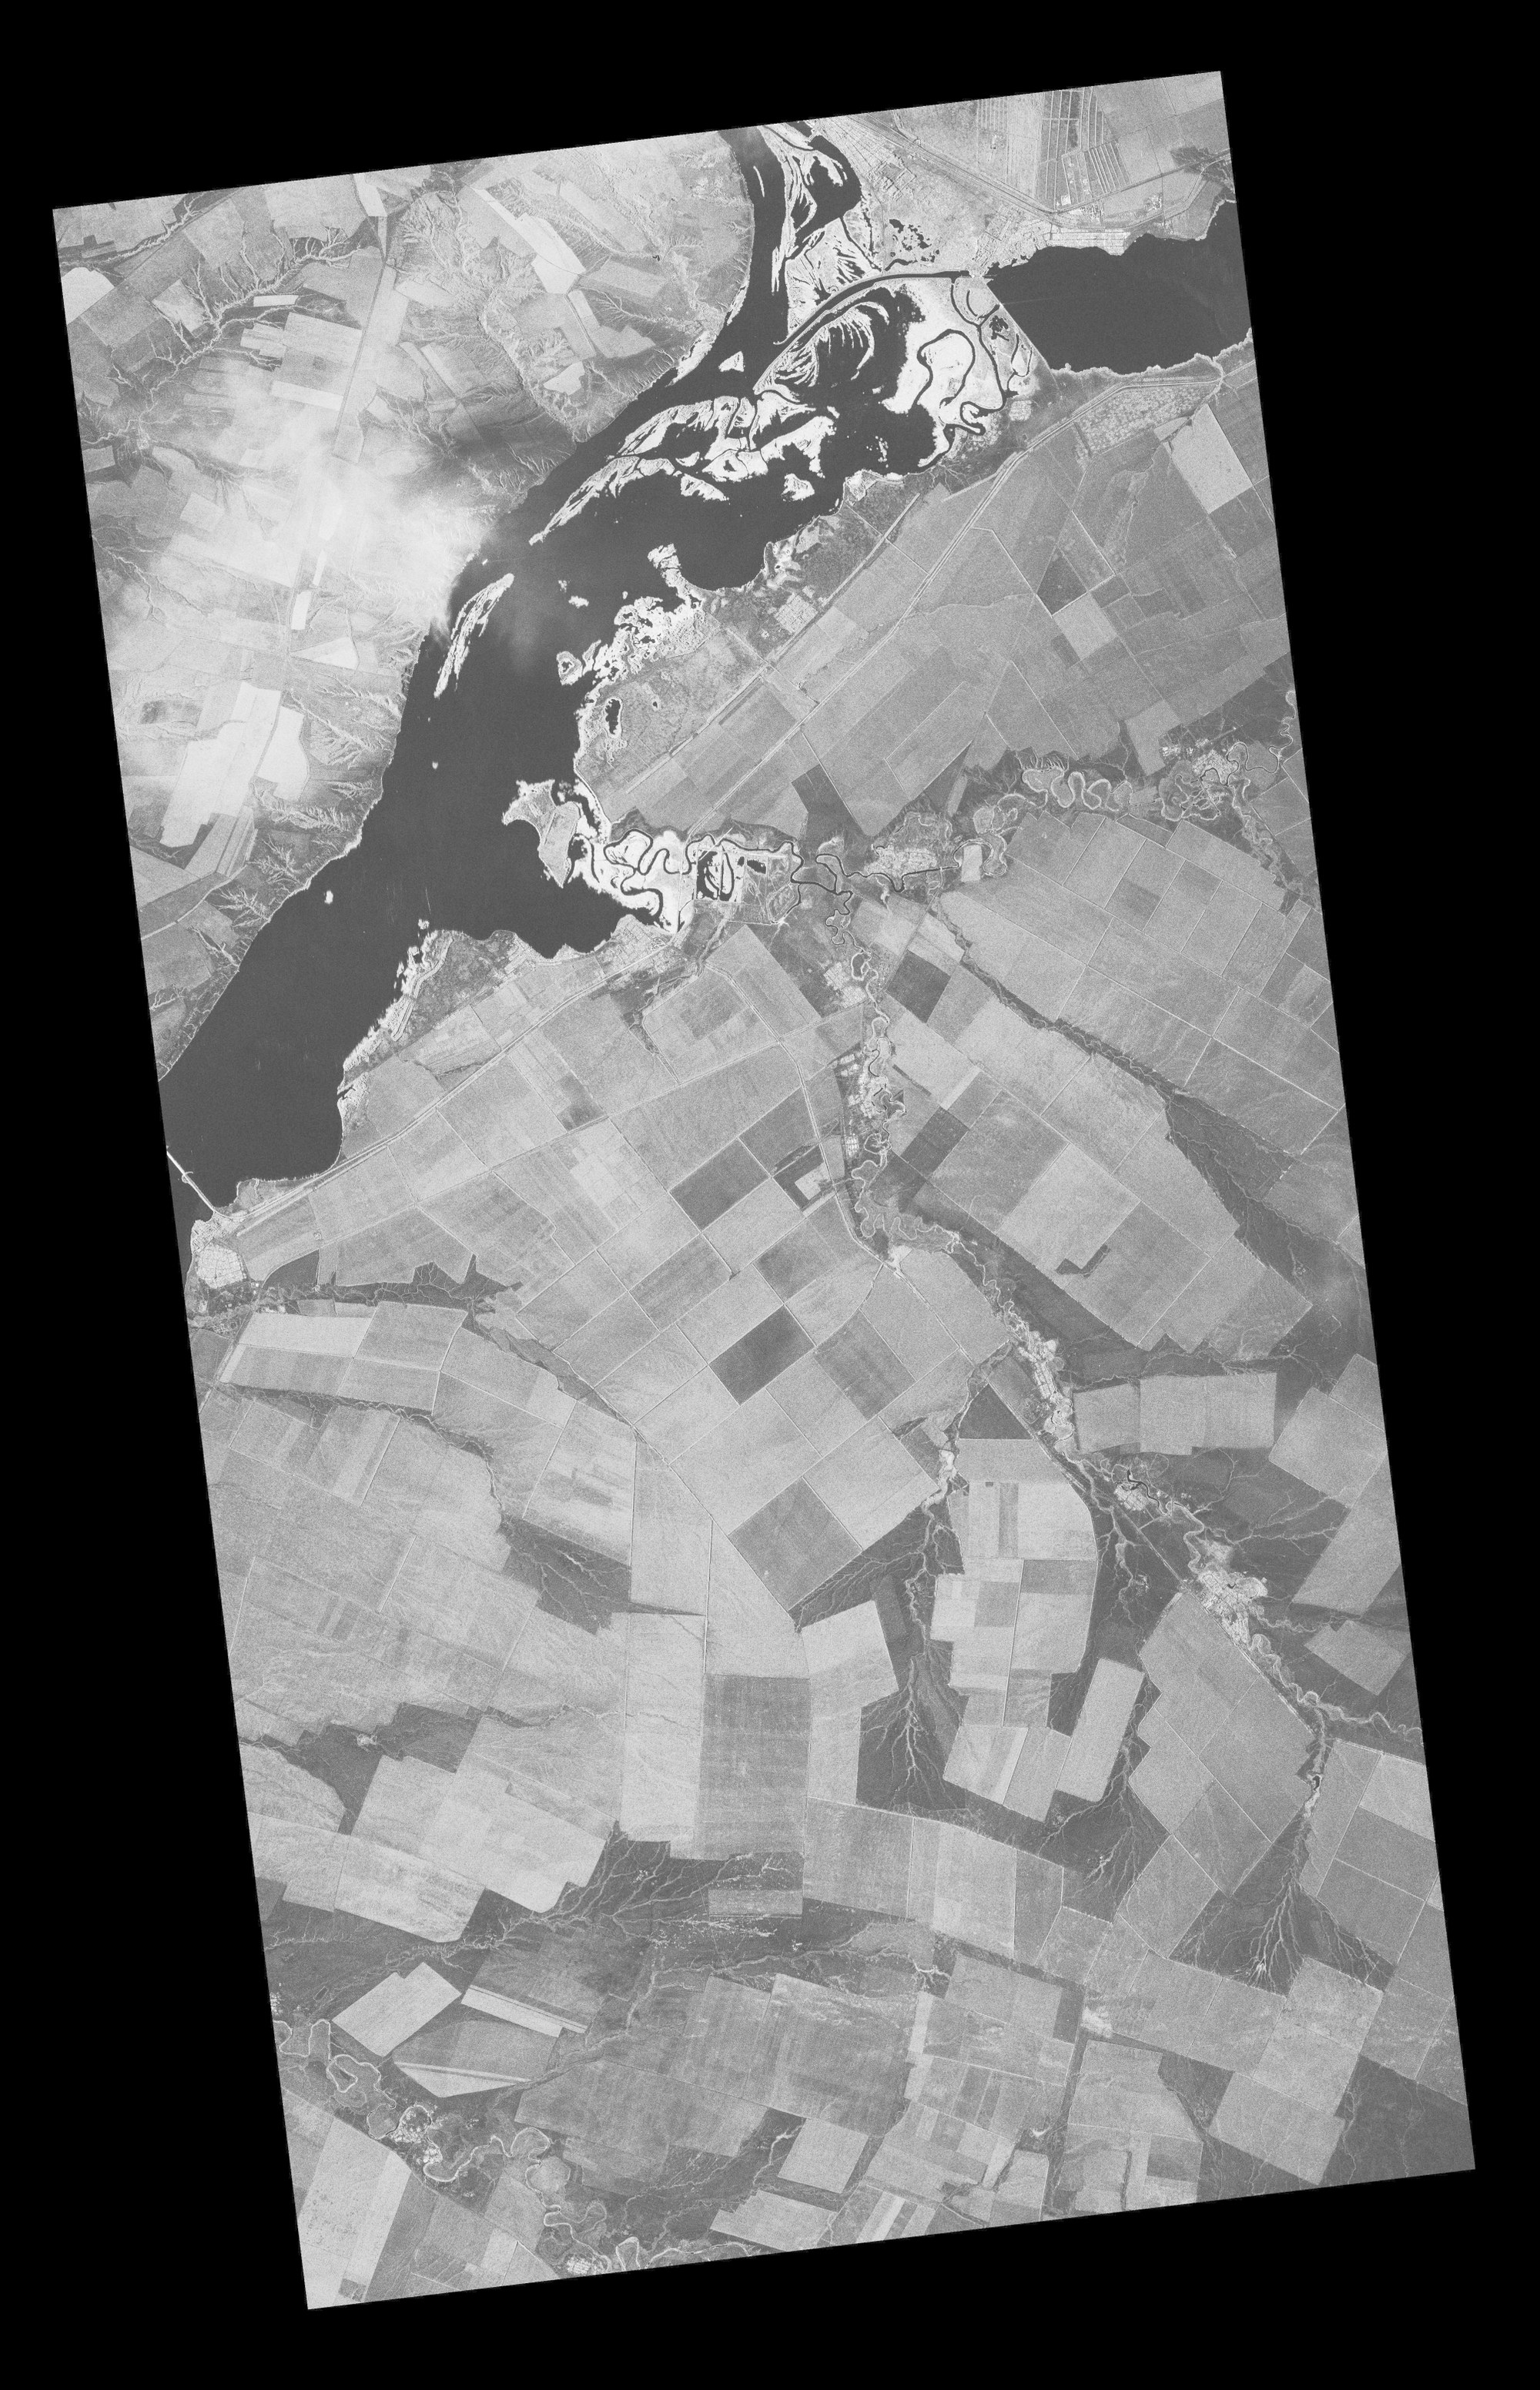 The first TerraSAR-X image: Russia, west of Volgograd